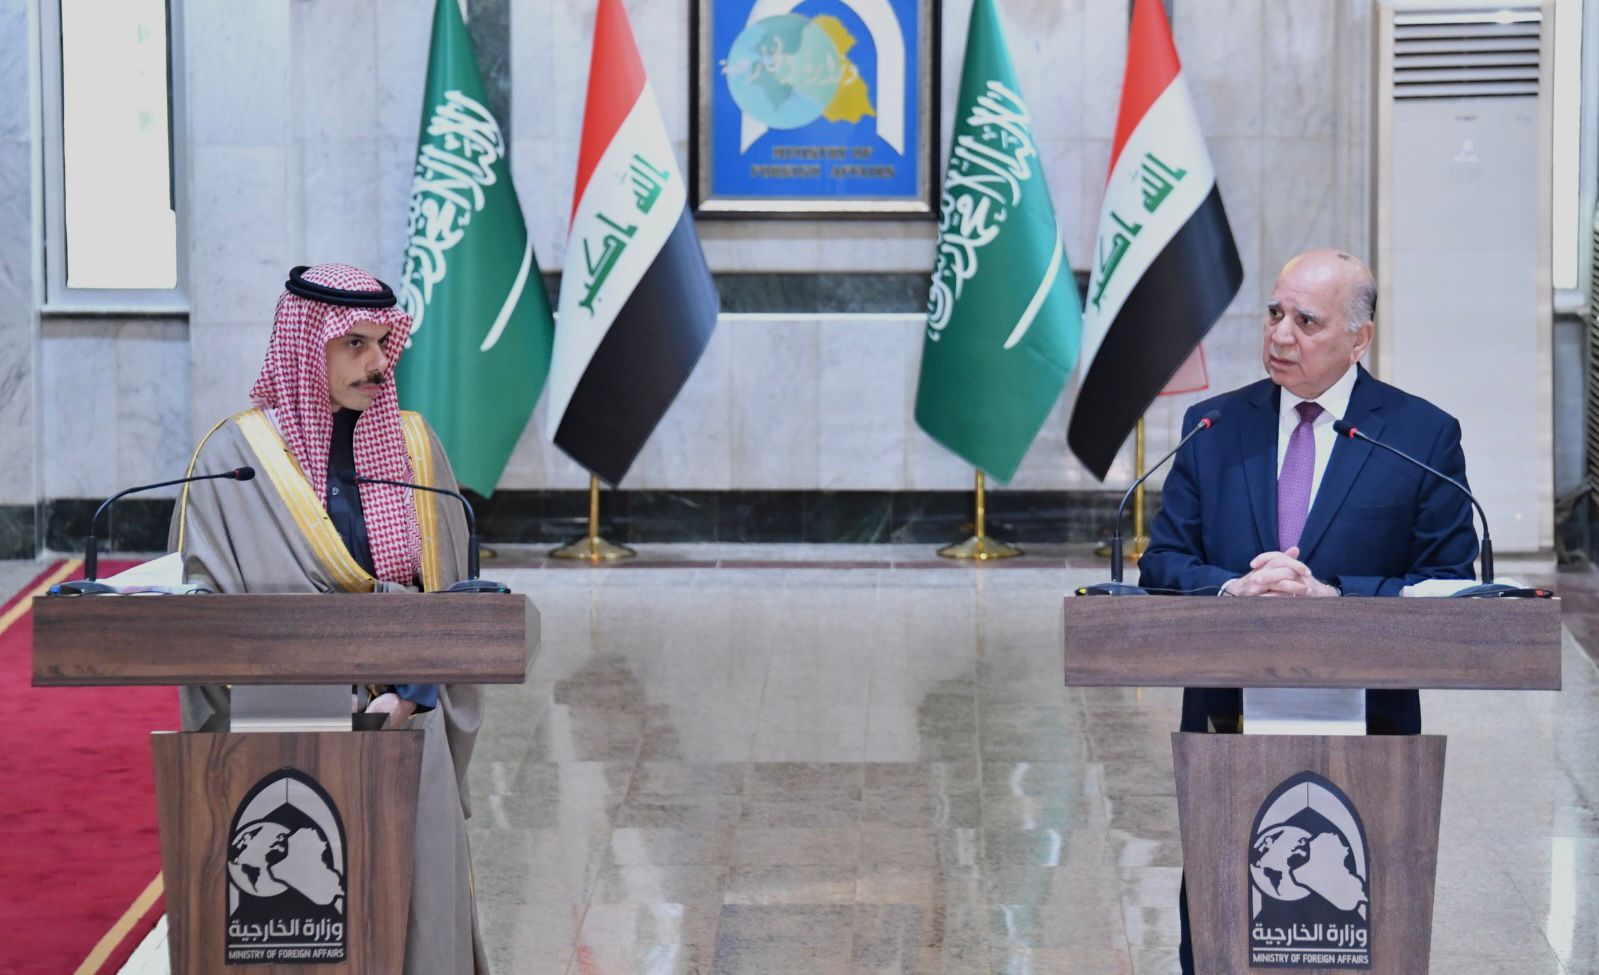 Security cooperation is ongoing between Baghdad and Riyadh Iraqs FM